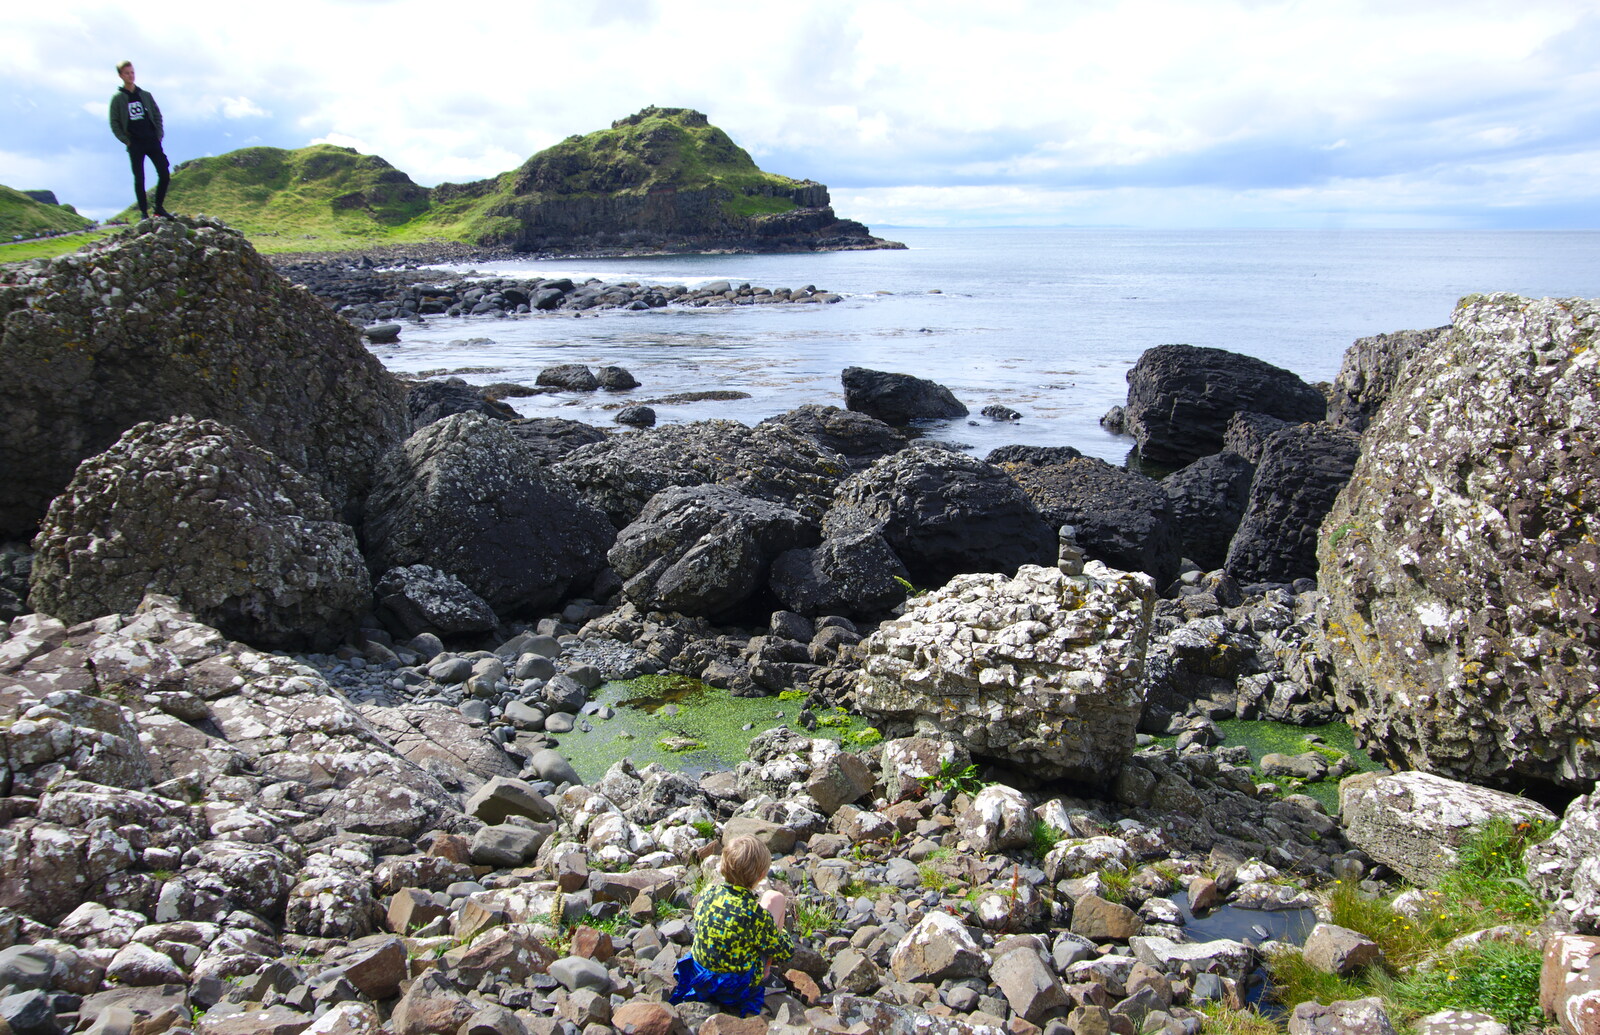 Harry is almost camouflaged from The Giant's Causeway, Bushmills, County Antrim, Northern Ireland - 14th August 2019